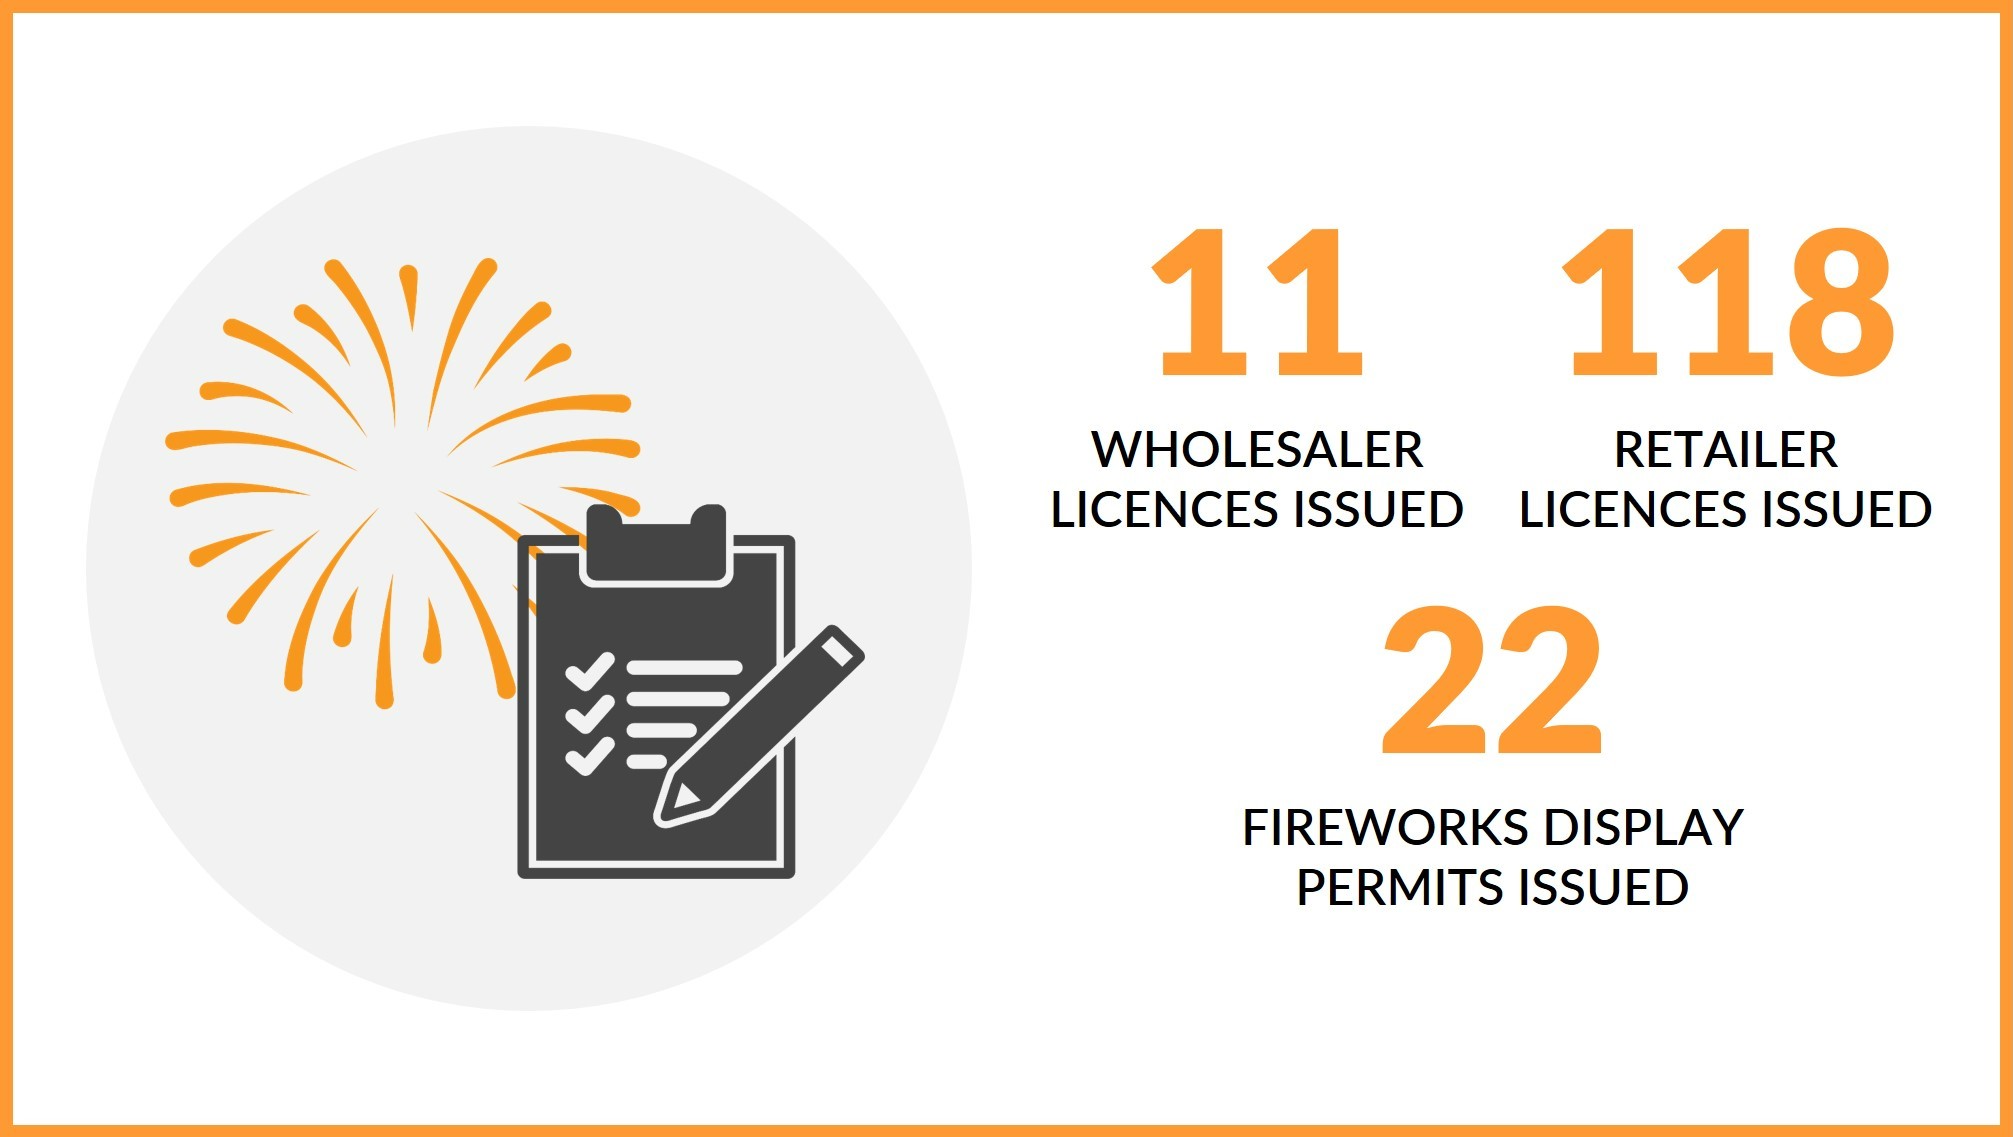 The image shows the number of licences and permits NT WorkSafe issued in relation to the sale and use of fireworks on Territory Day.